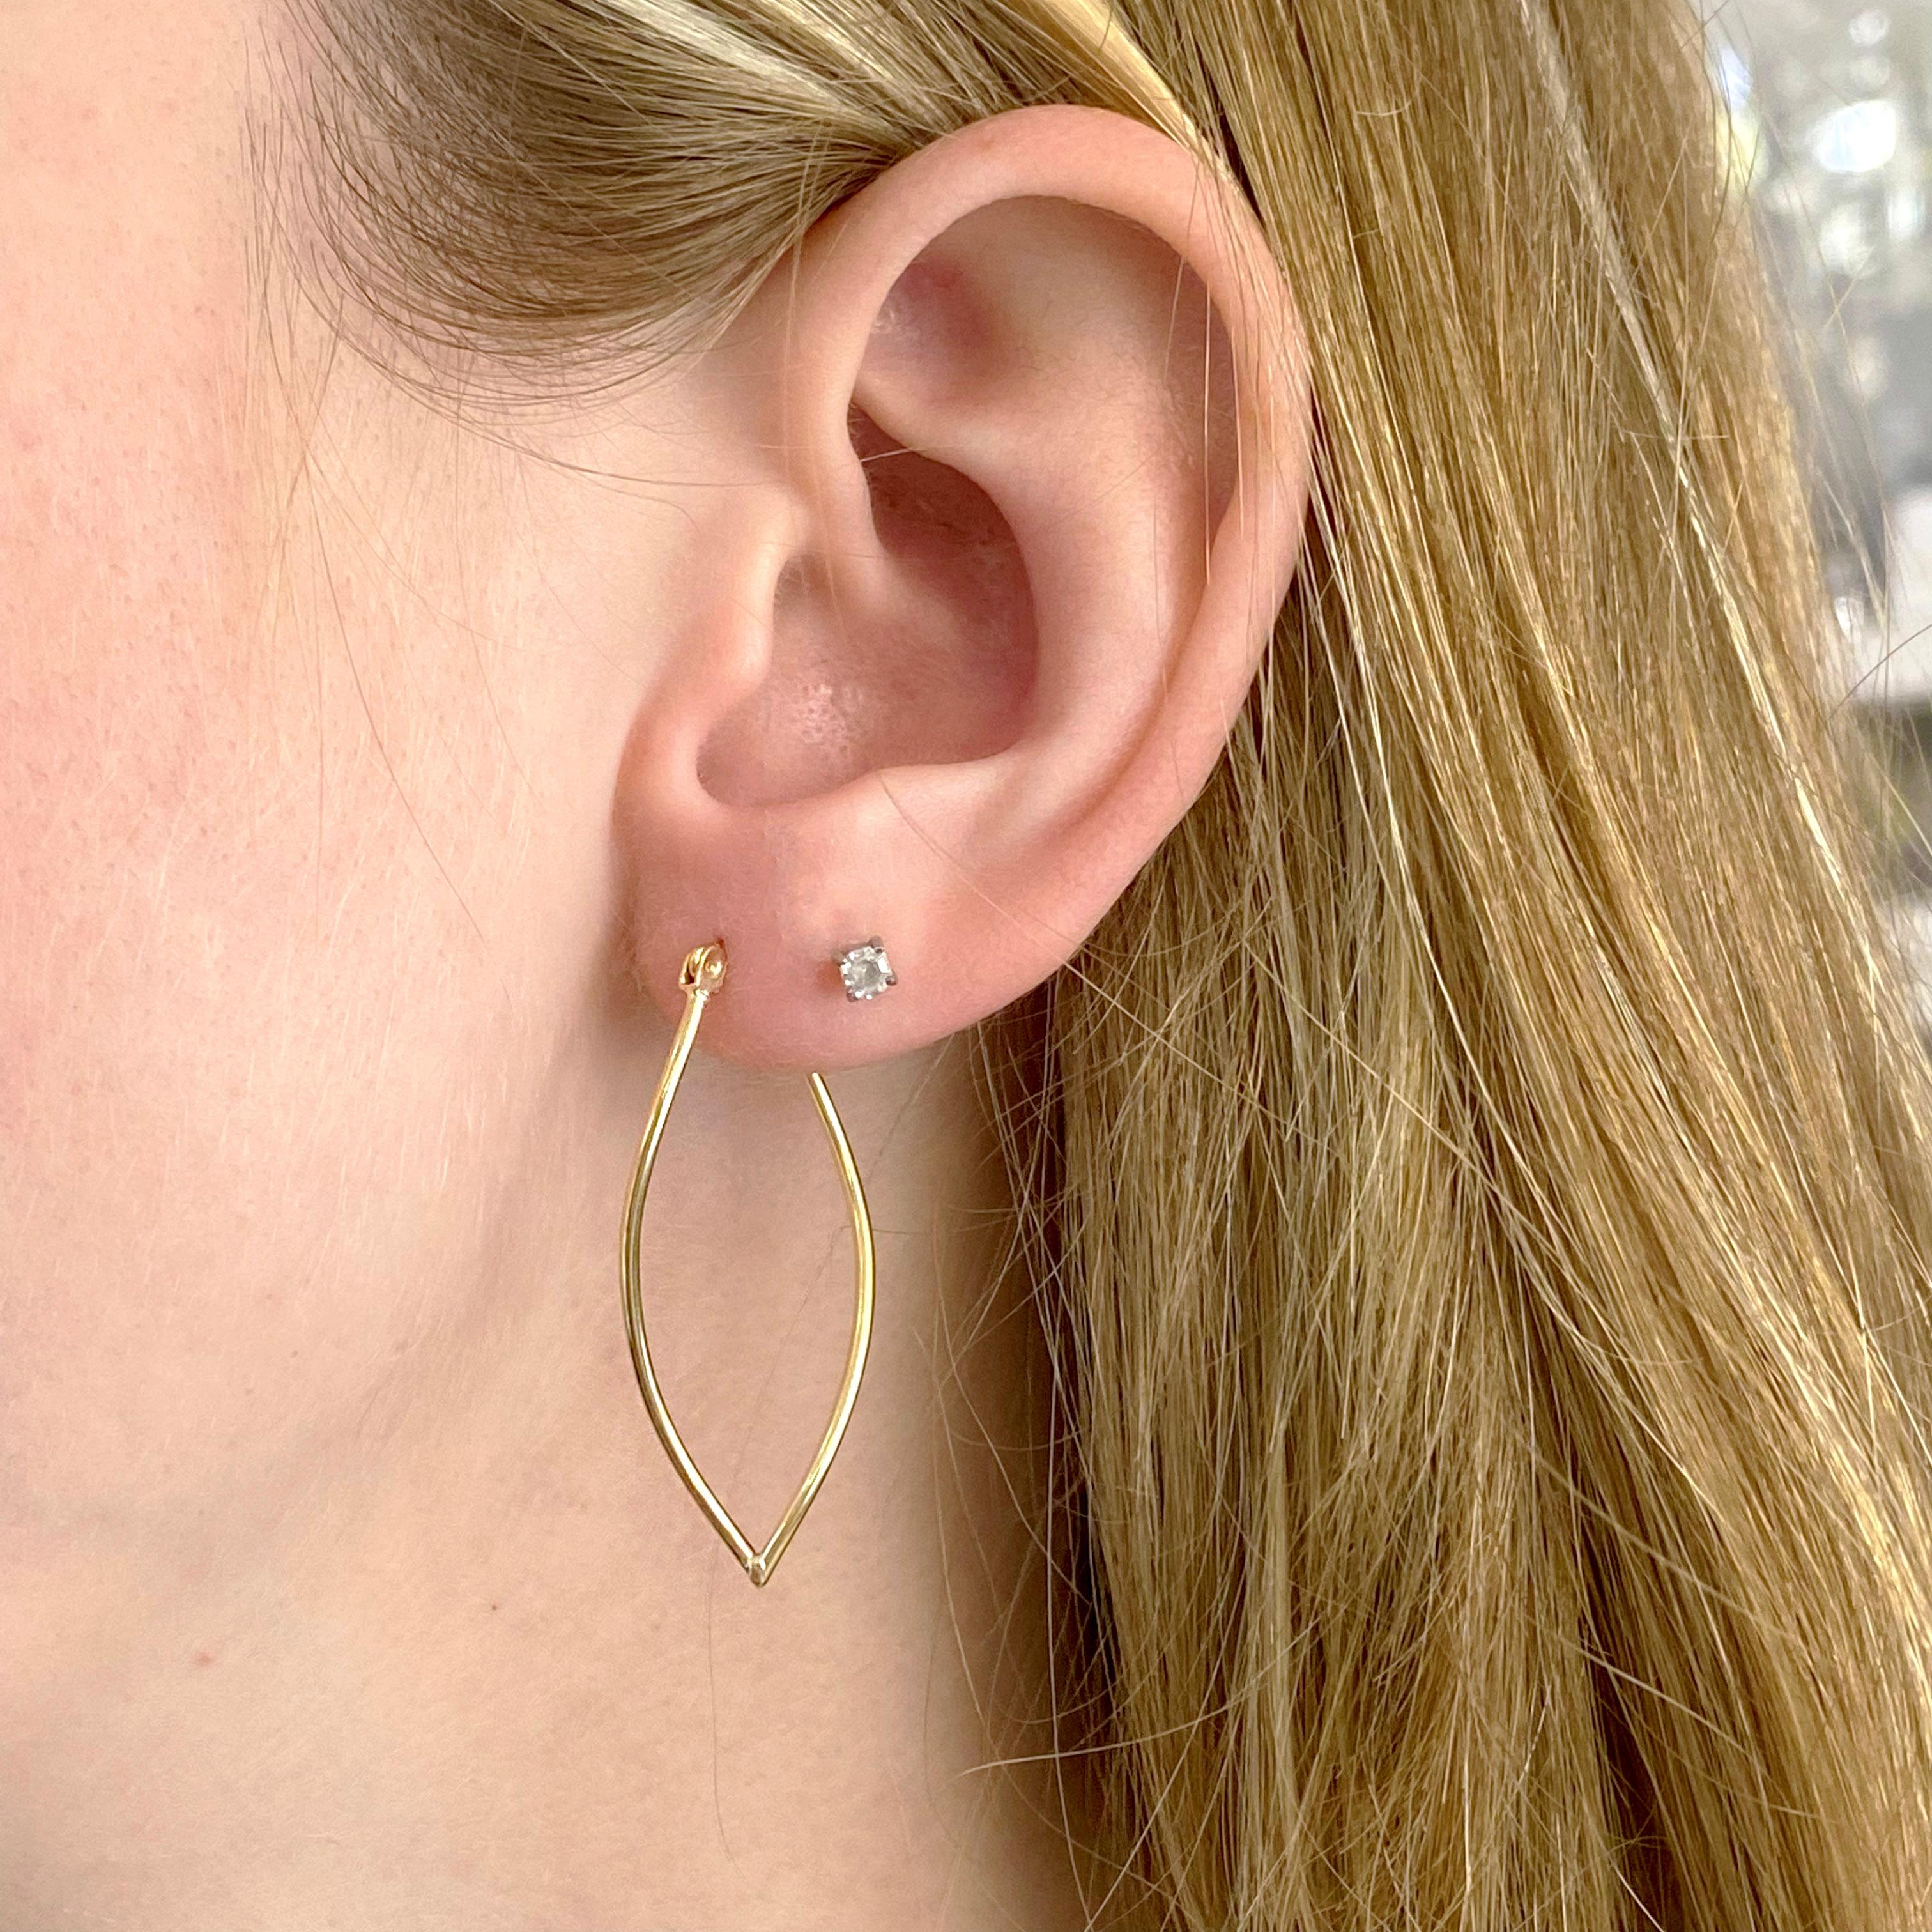 14k Gold Hoop Earrings with a twist. The earrings are a pointed hoop that look amazing on any neck. They are lightweight so that they do not pull on your earlobe and are so unique! You will love these earrings! They have a 14 karat yellow gold